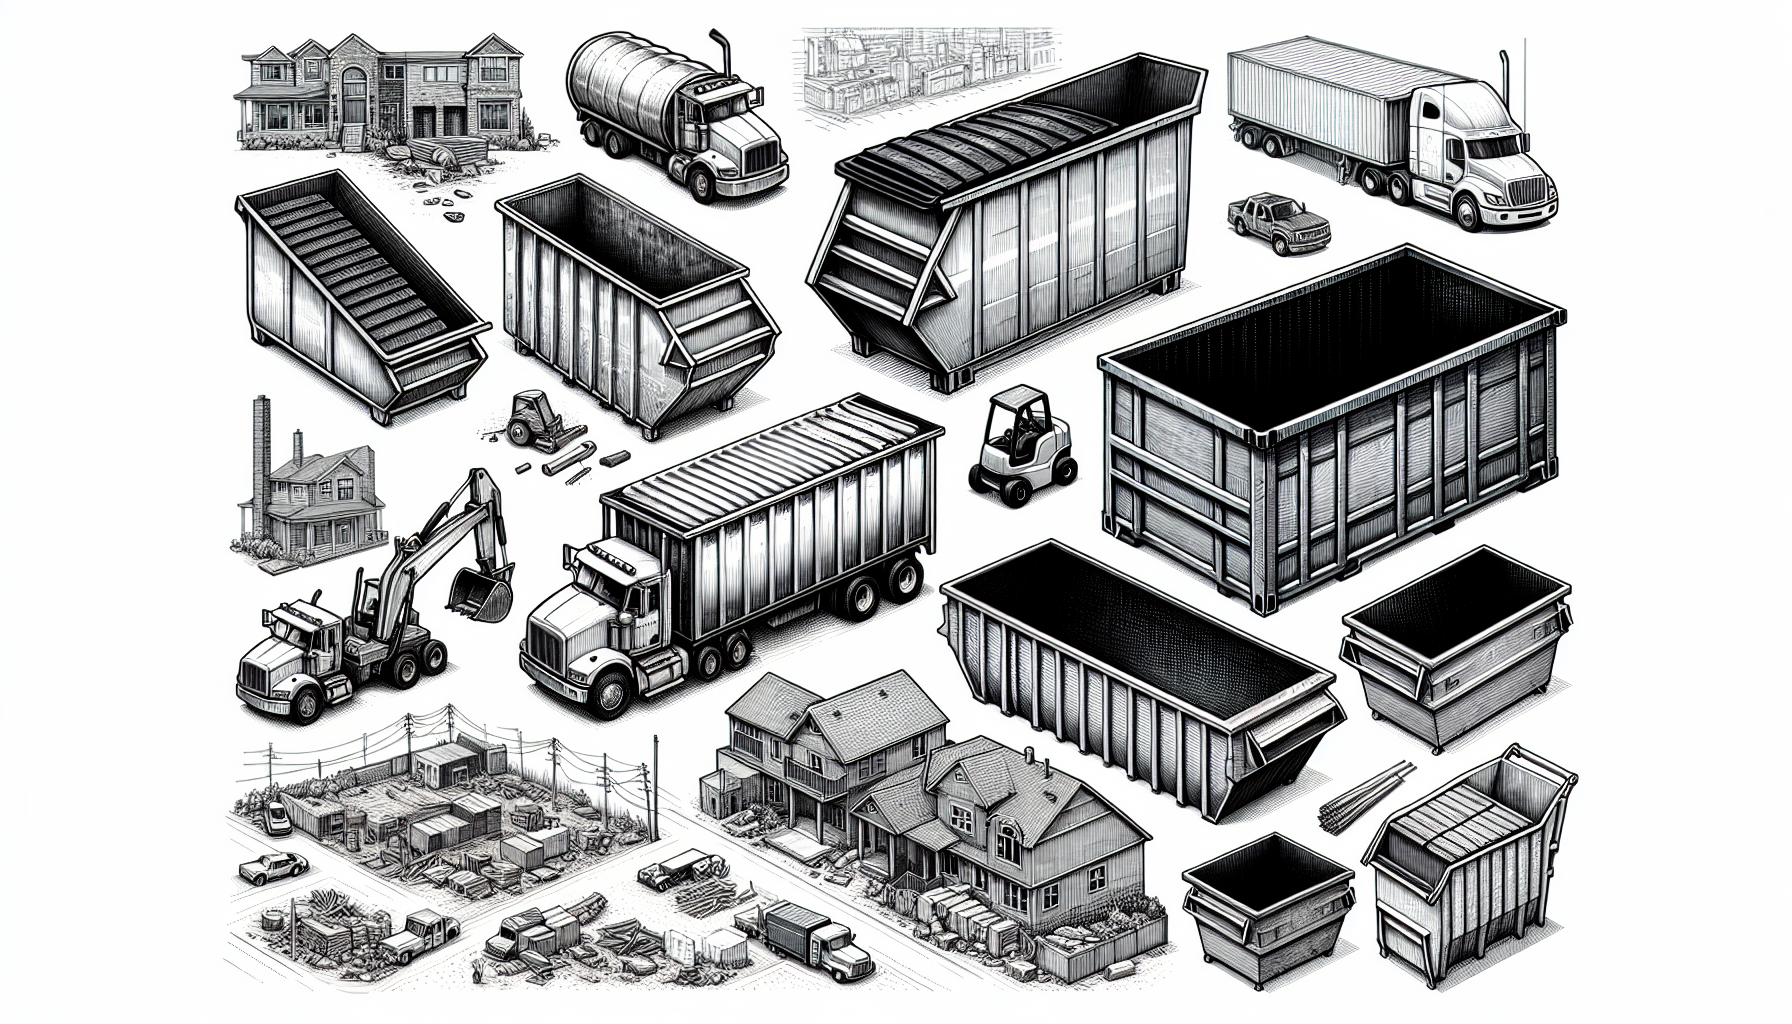 Assortment of different sized dumpsters